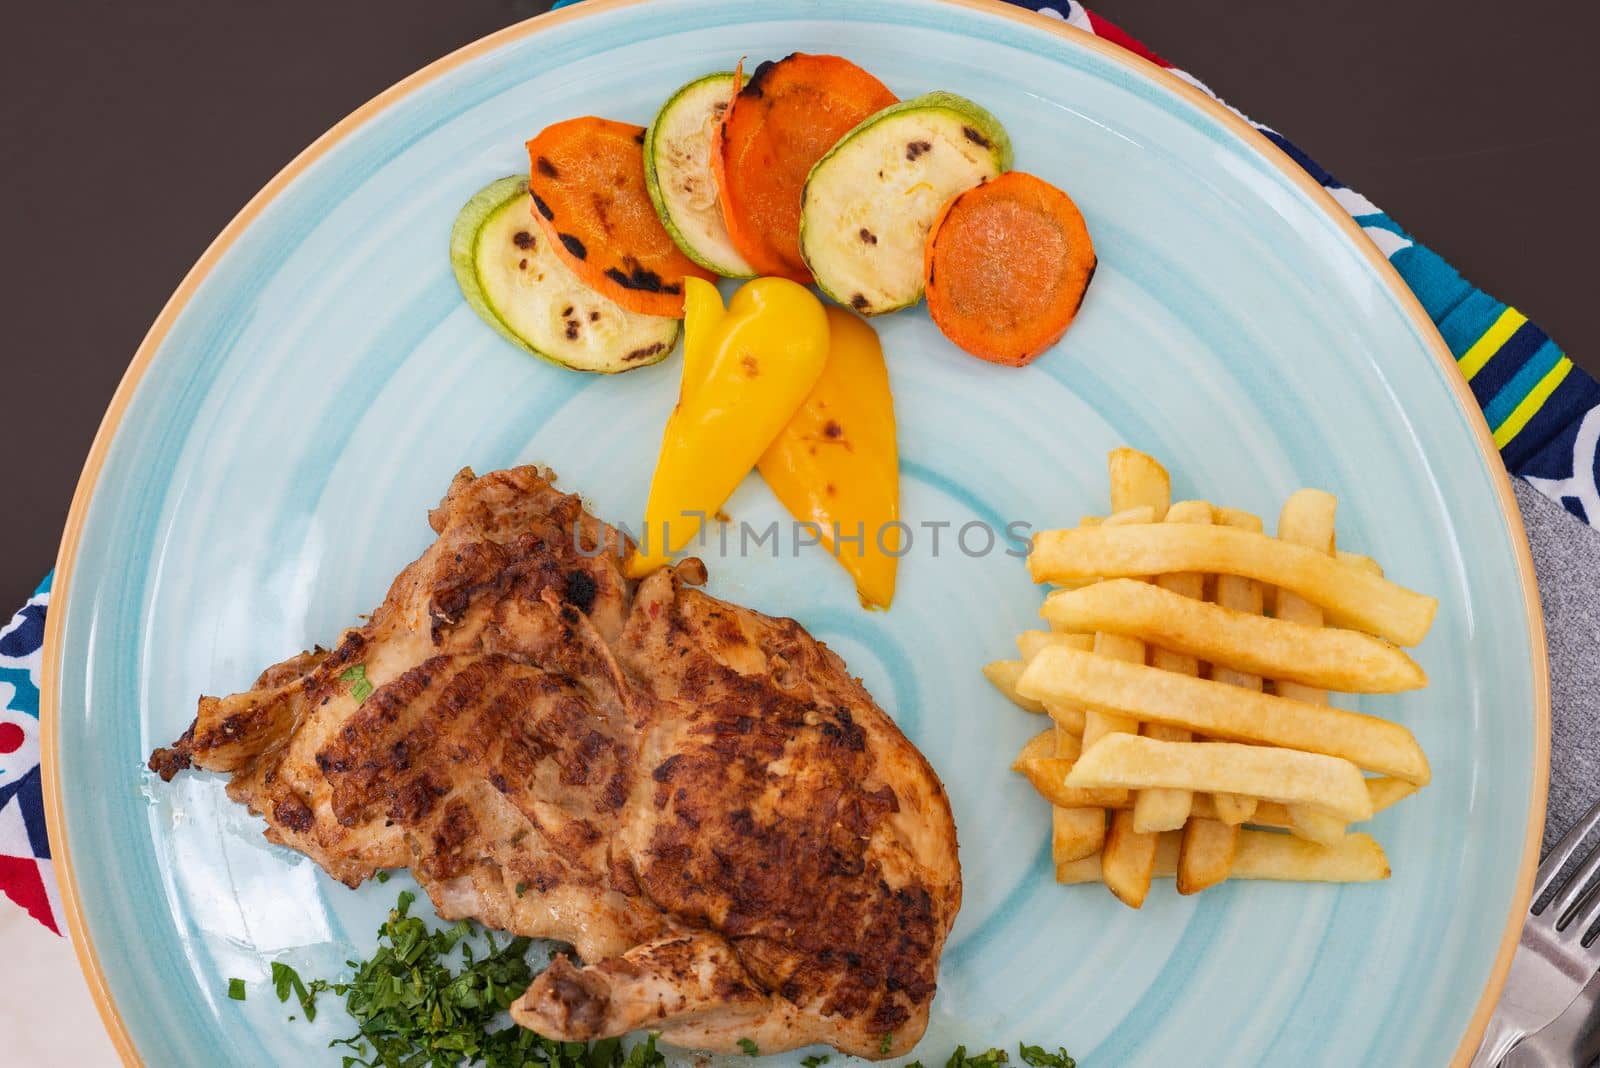 Beef steak a la carte meal with chips and vegetables by paulvinten